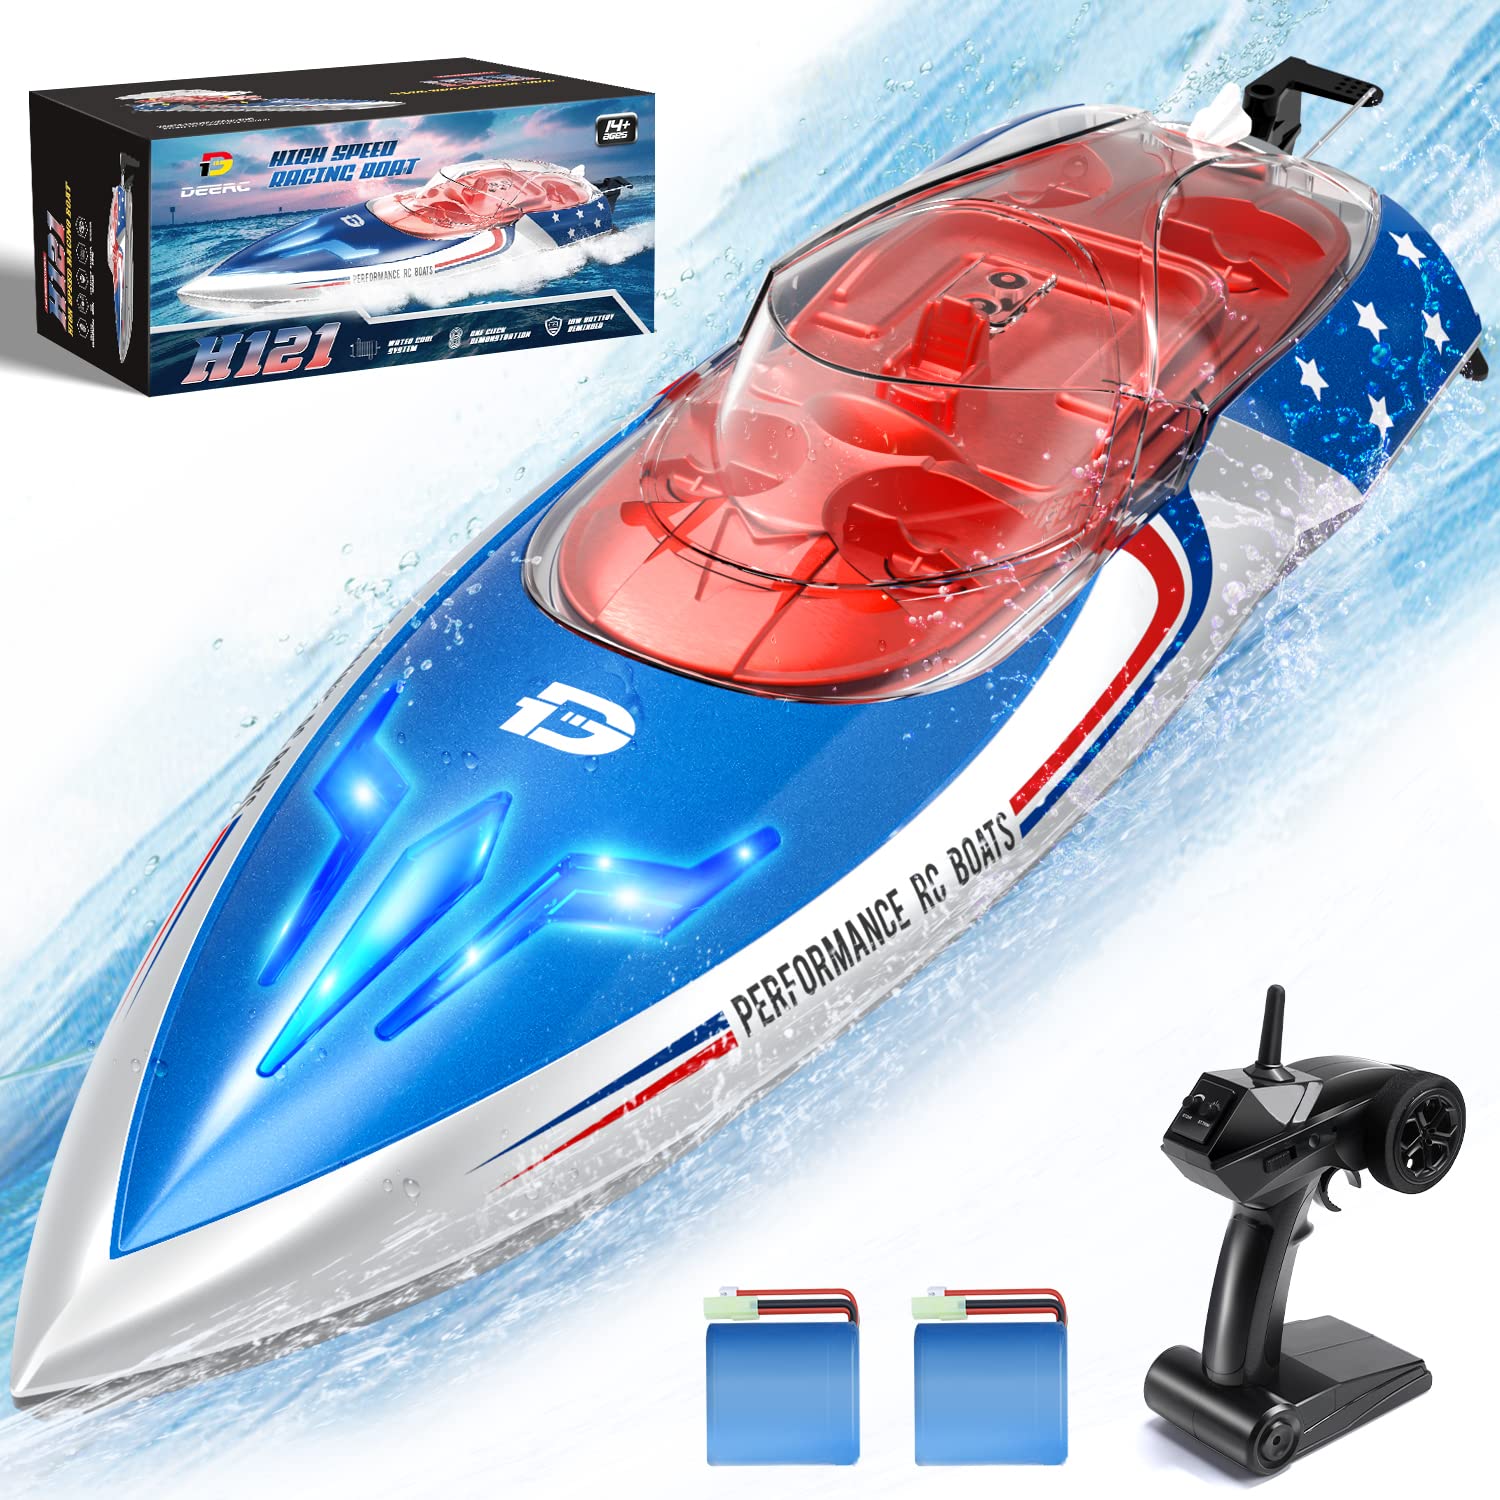 DEERC High Speed RC Boats with LED Lights & 2 Batteries, 20+ mph Remote Control Boat for Pools and Lakes, 2.4Ghz Racing Boats, 492FT, Pool Toys for Kids & Adults, Capsize Recovery, Xmas Gift